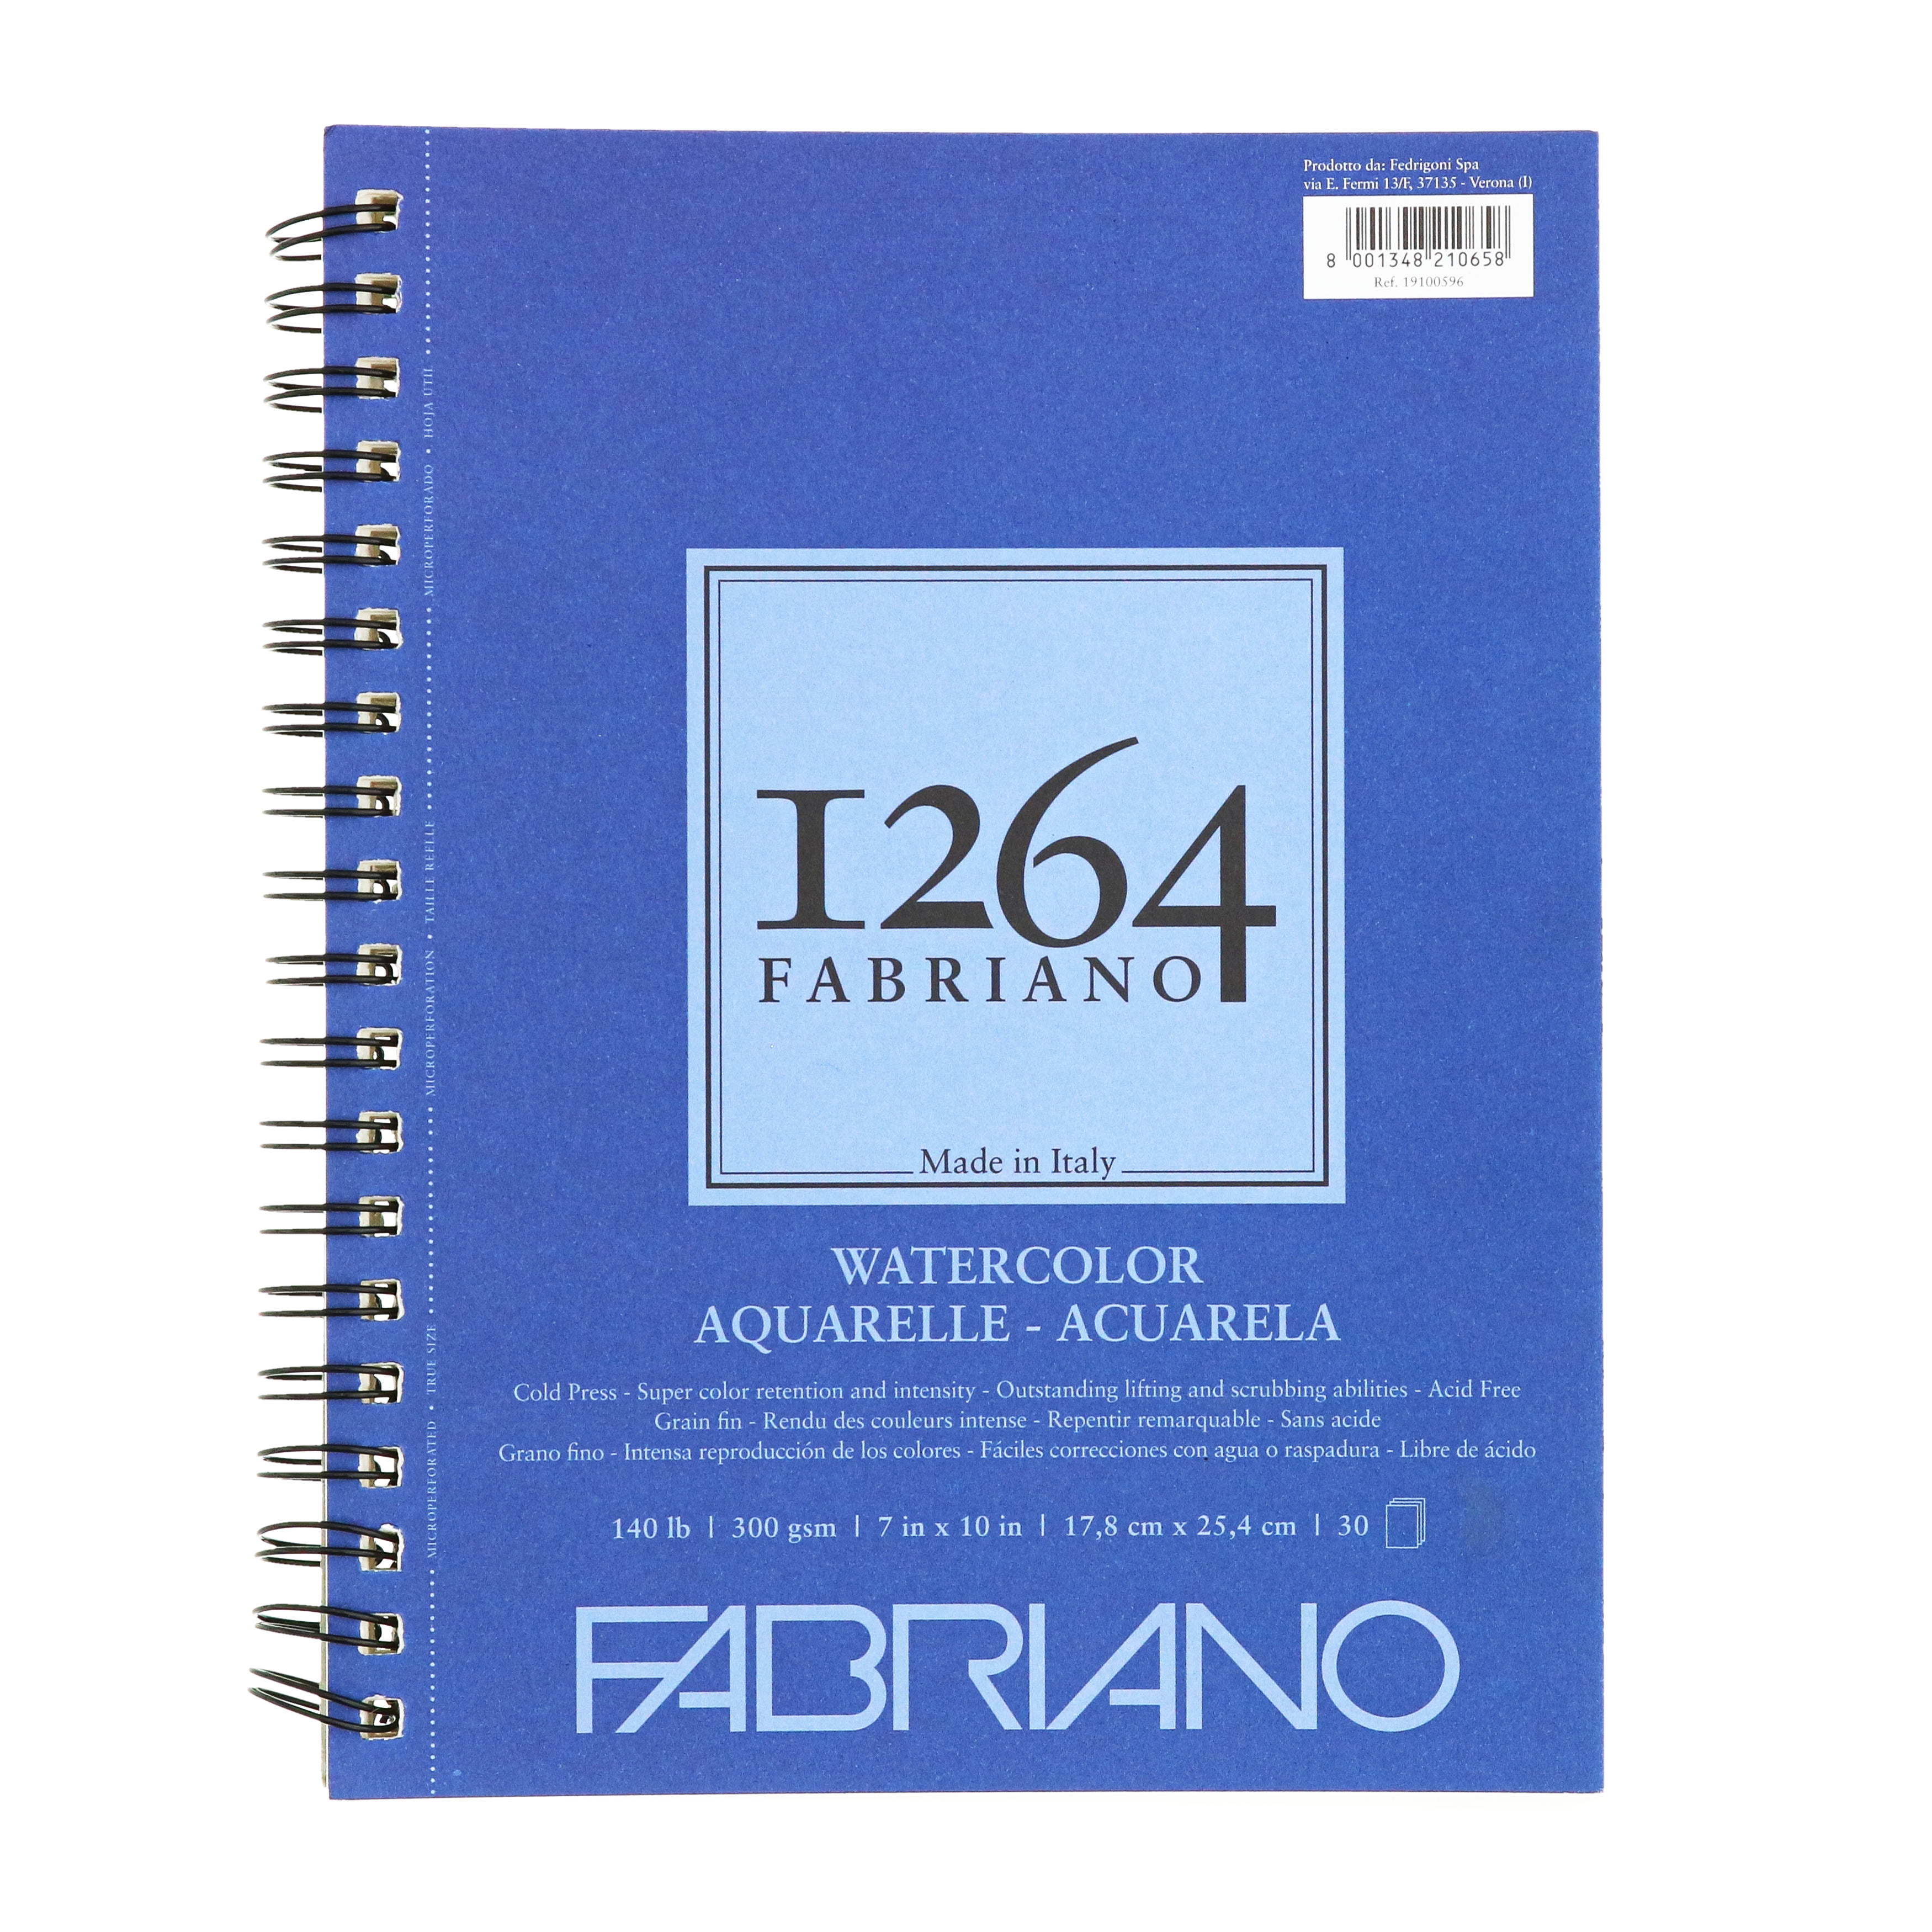 Wholesale Fabriano Watercolor Pads